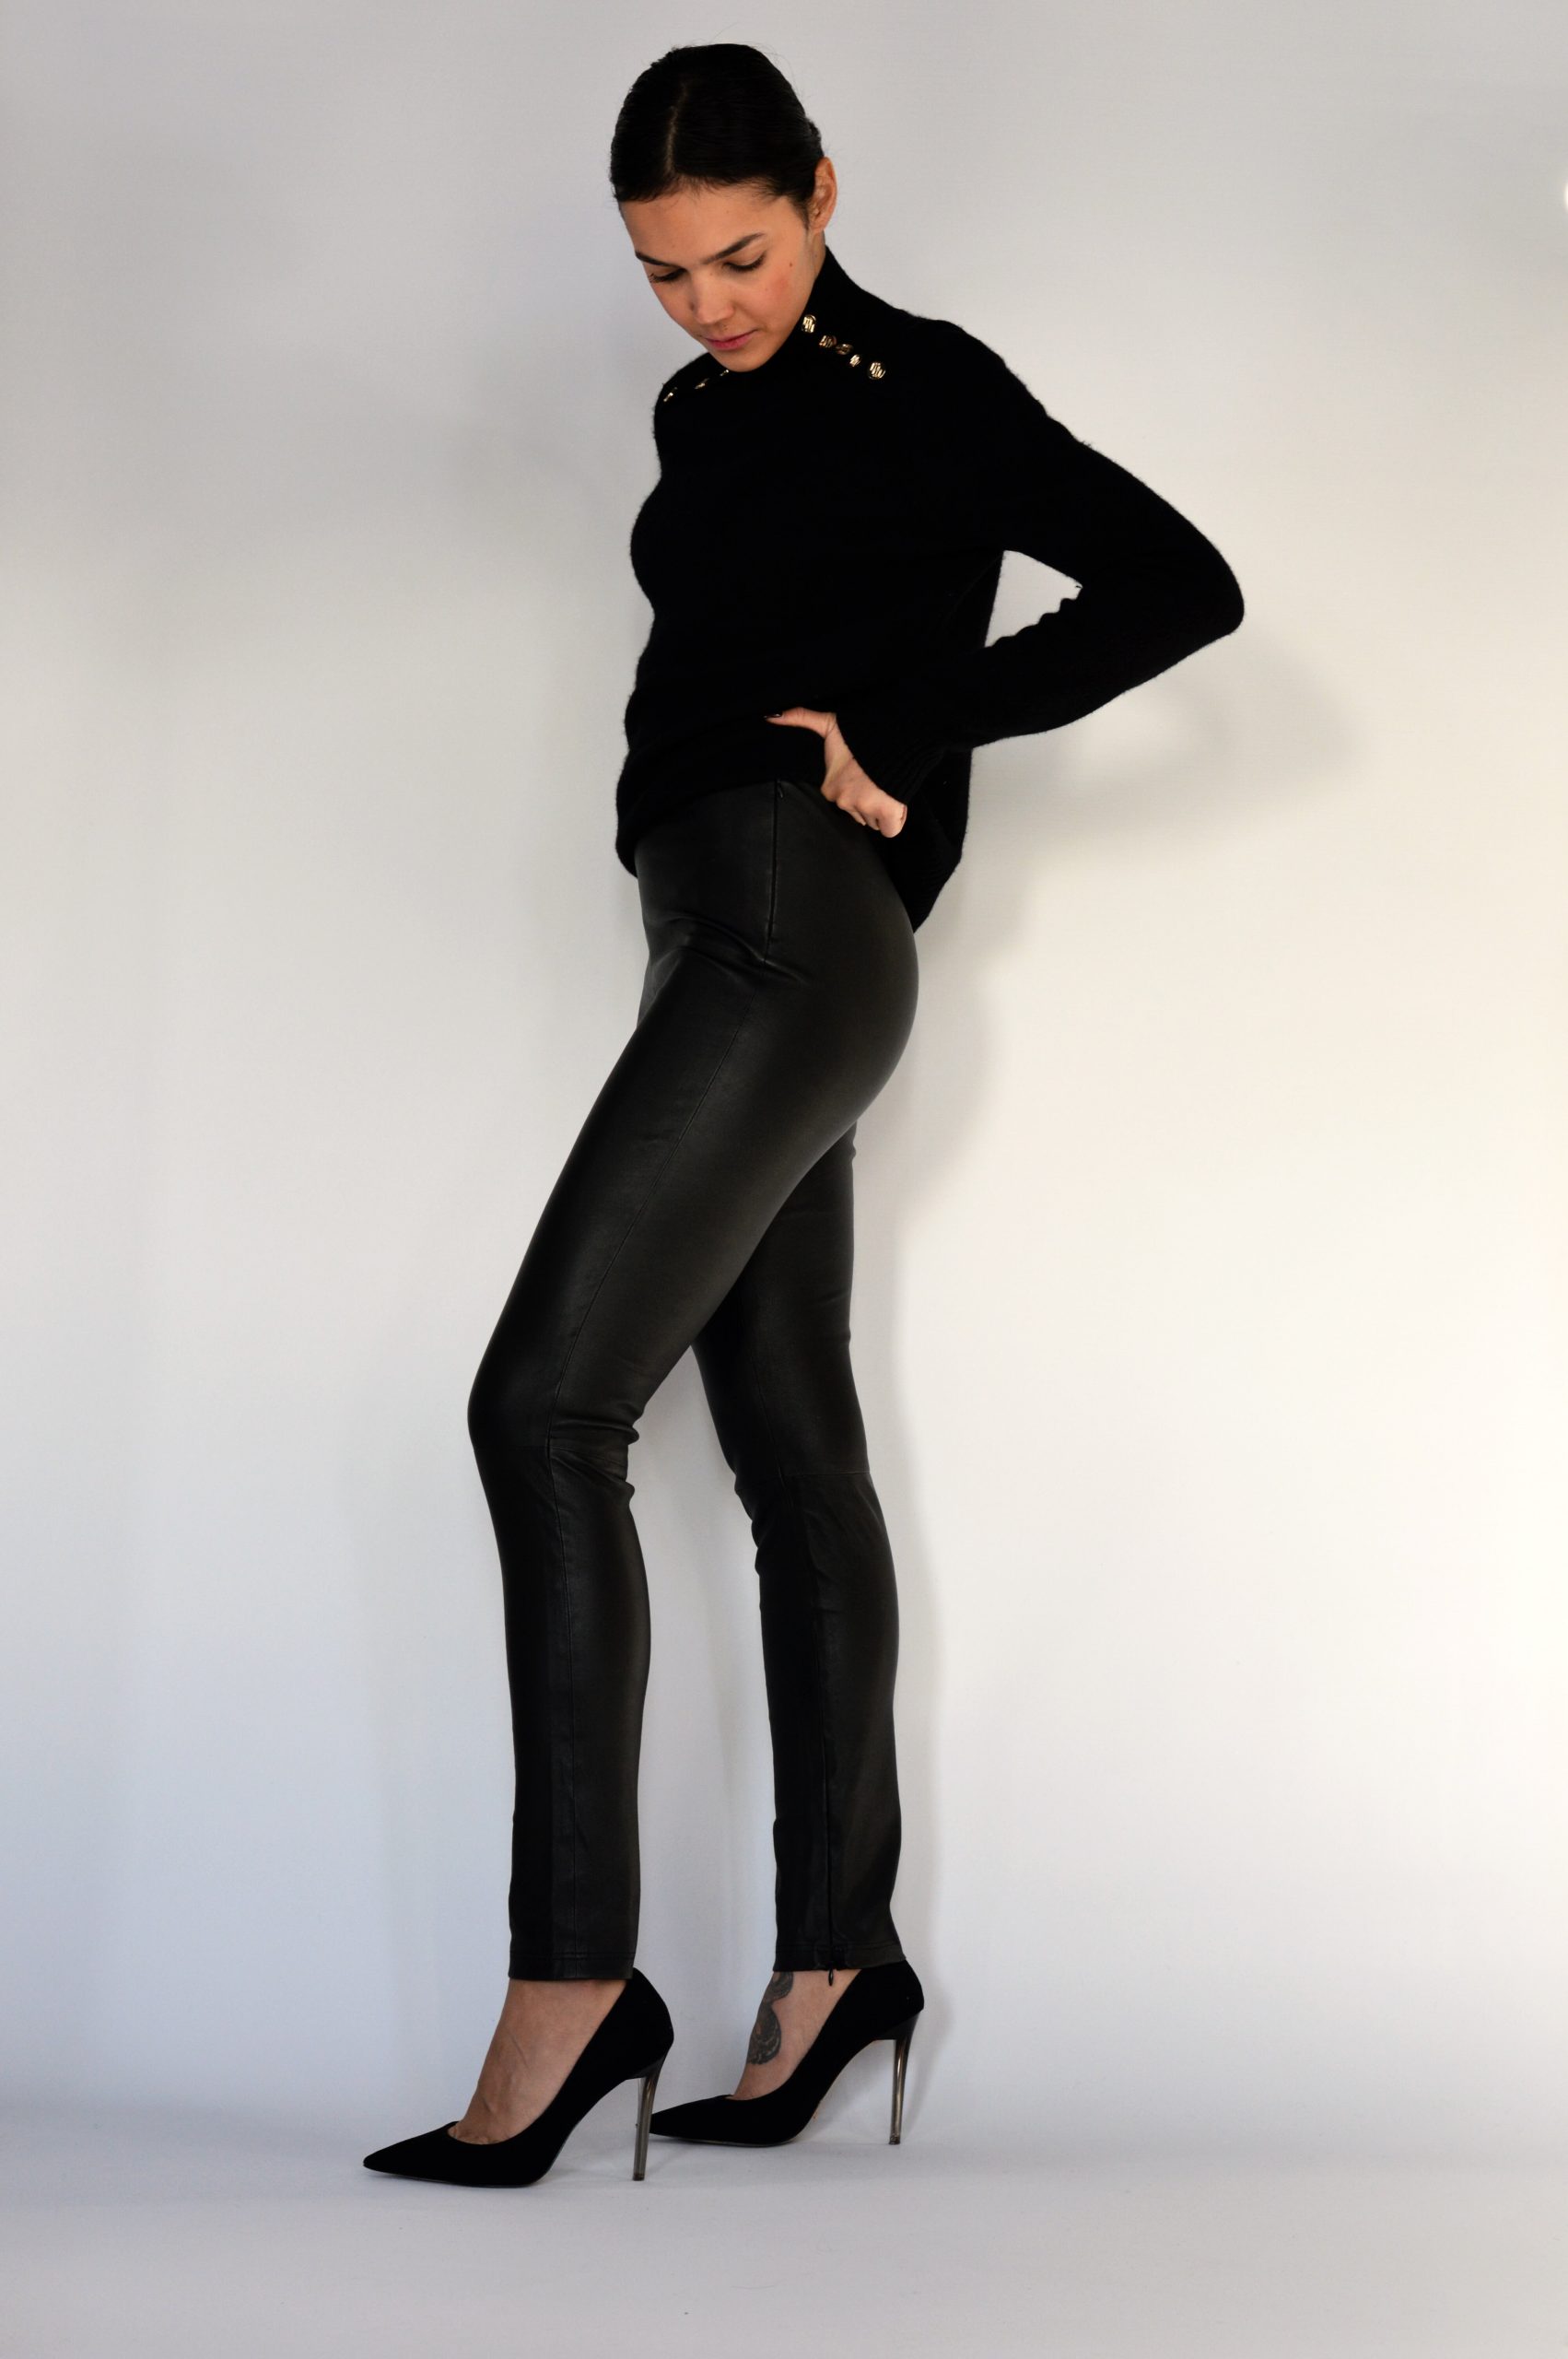 woman wearing black leather pants with a black top and high heels side view looking down